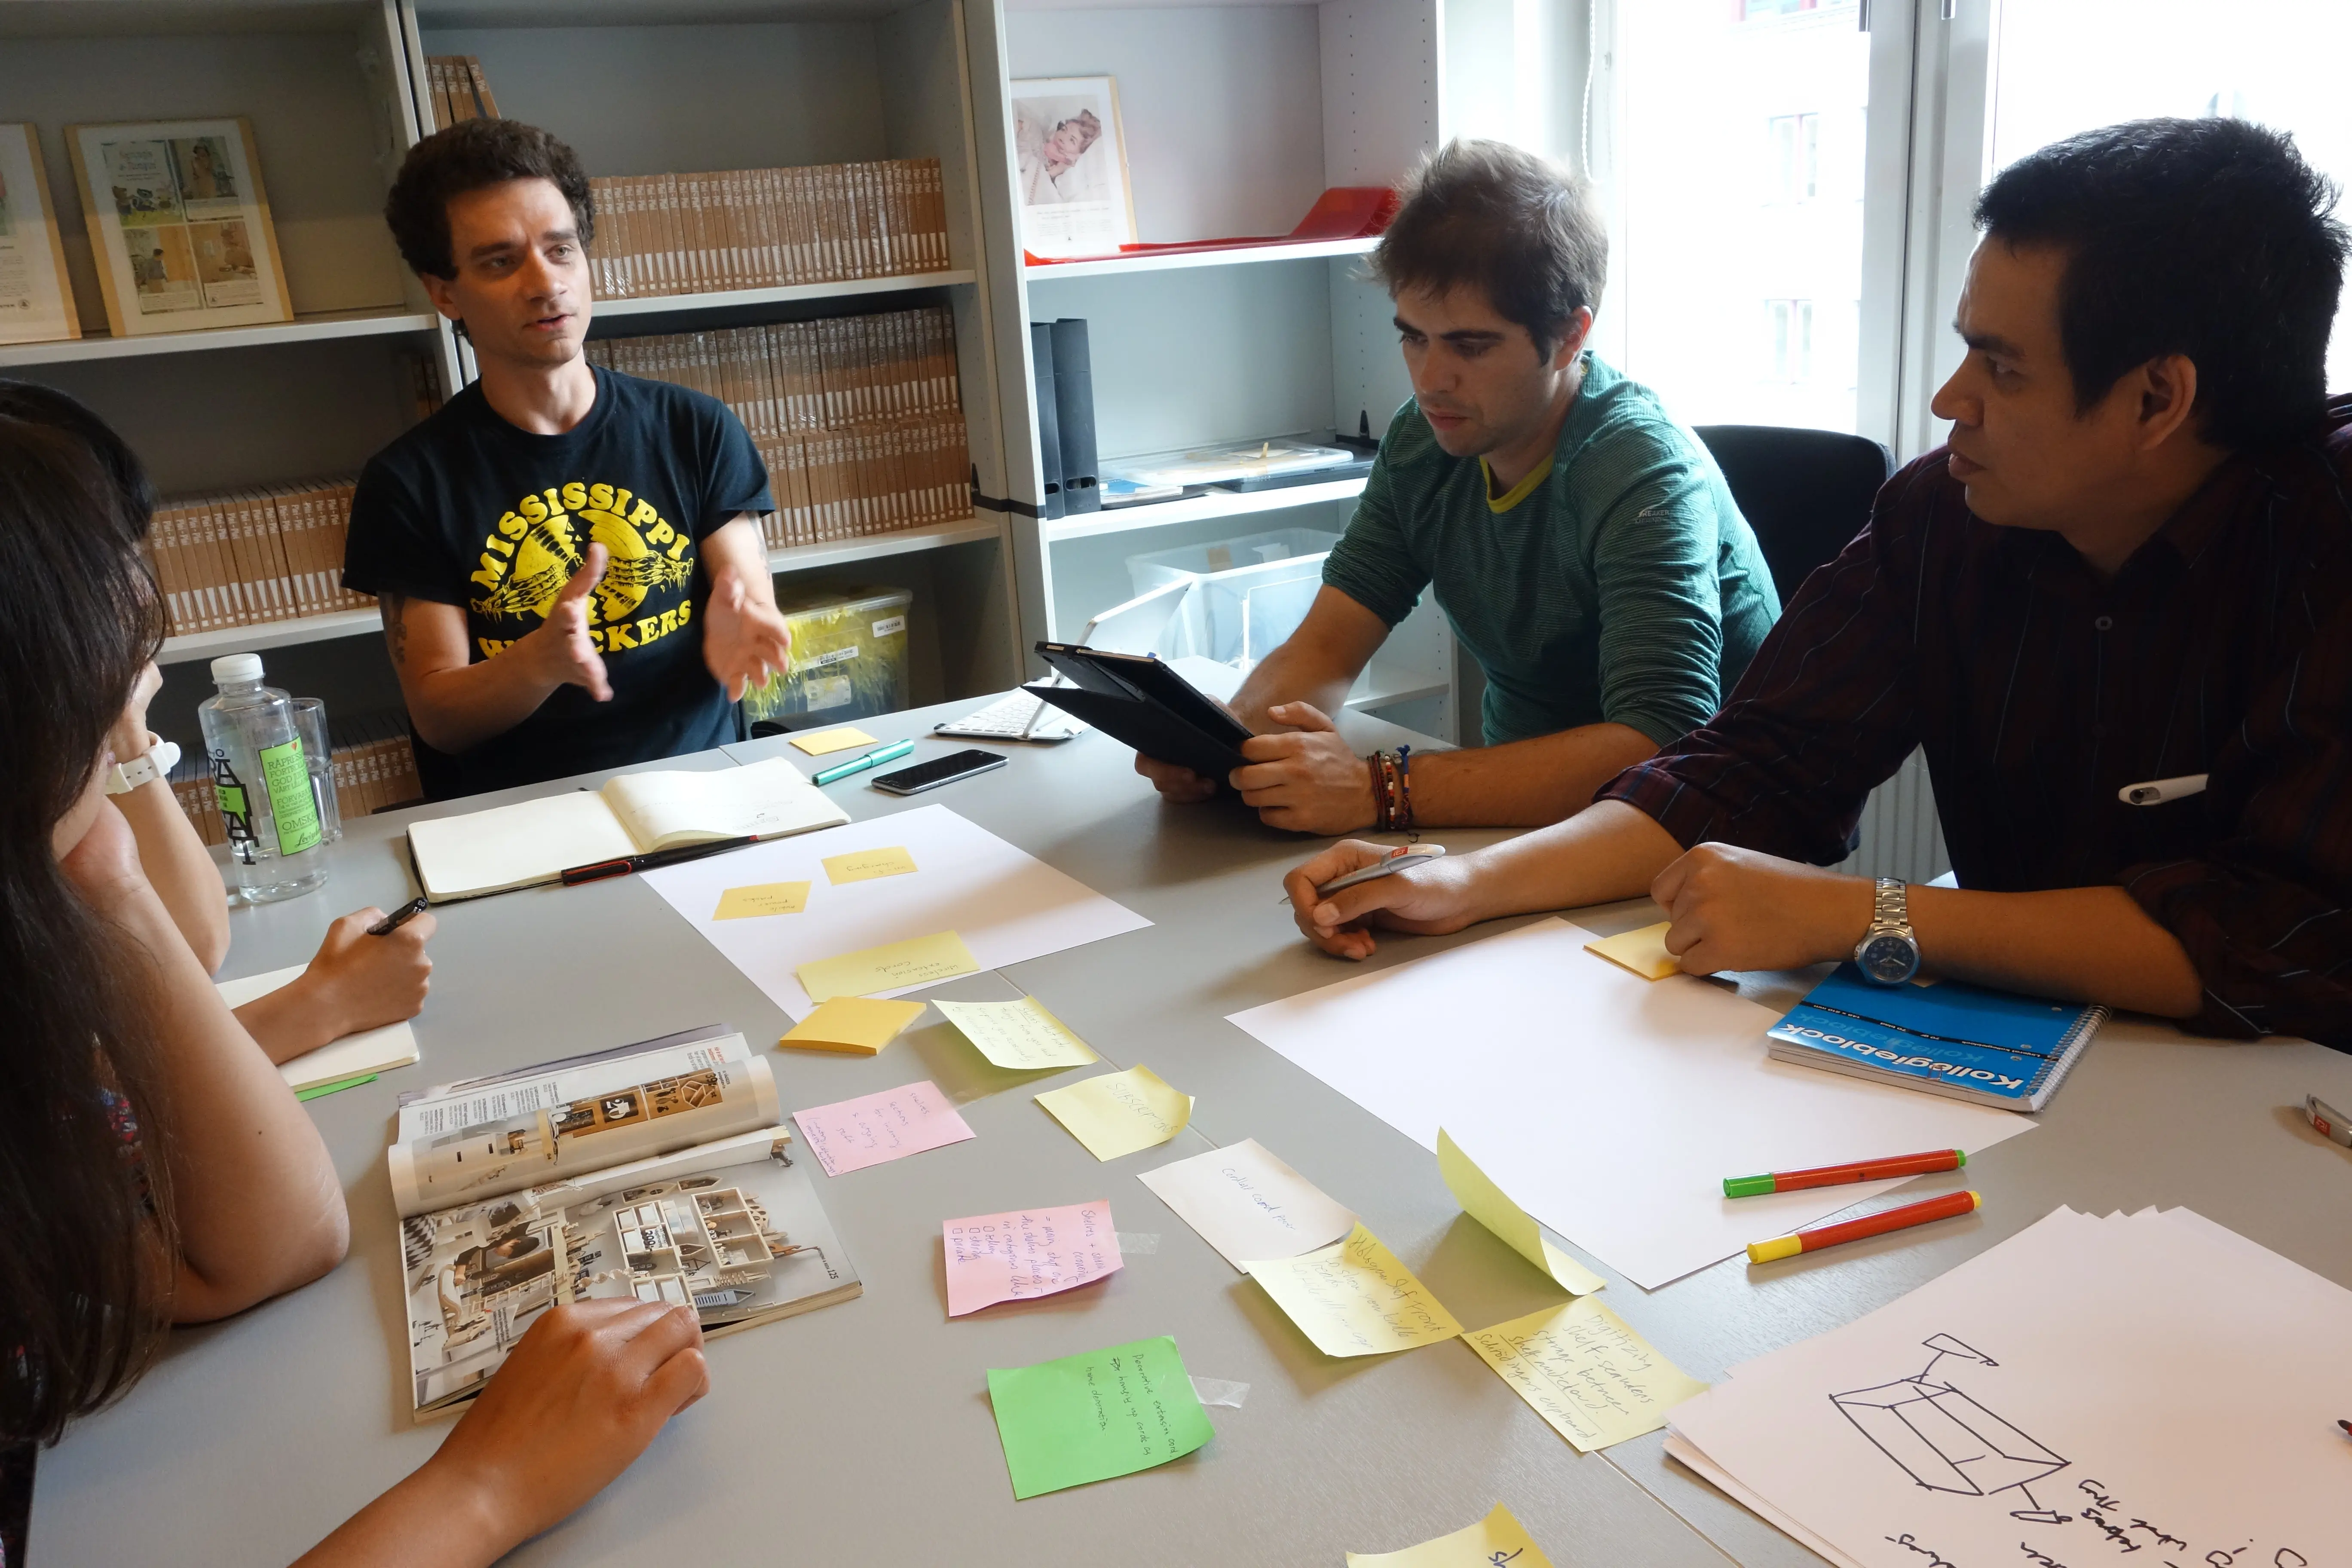 Workshopping the Design Fiction project IKEA Catalog by Near Future Laboratory